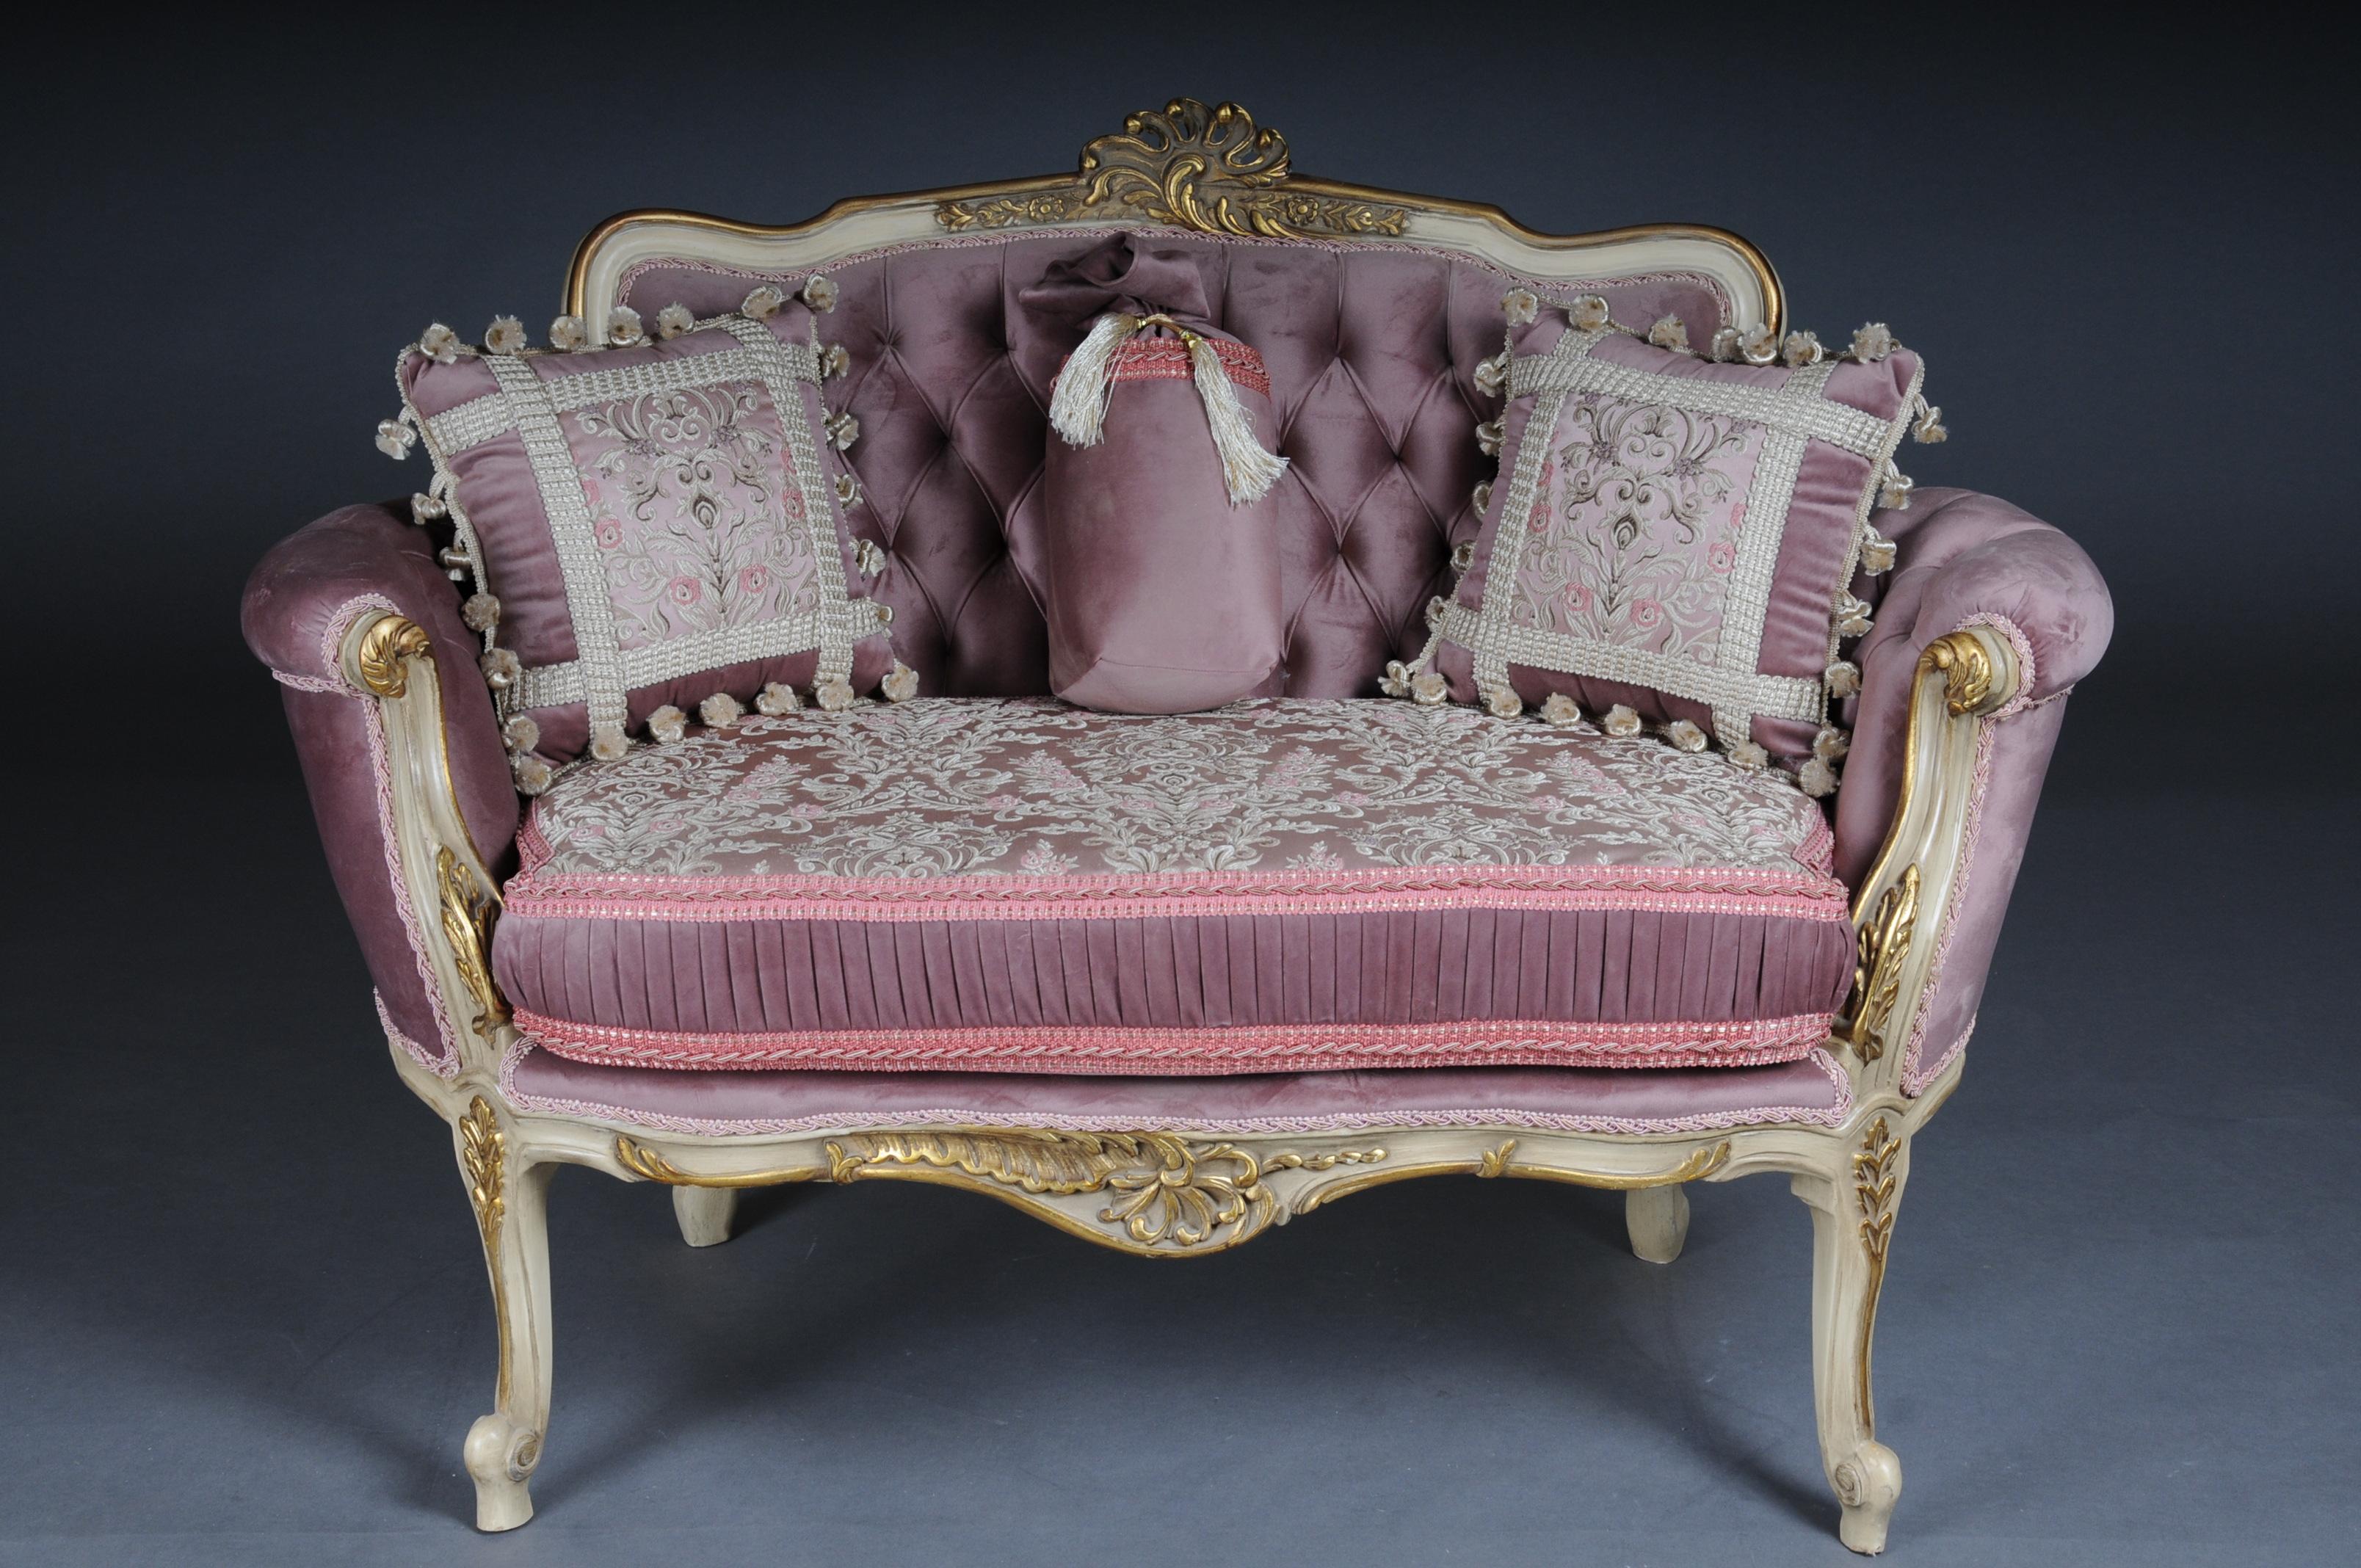 Extremely Elegant French sofa, Louis Seize XVI

Solid beechwood, carved and gilt gilded. Semicircular rising, curved backrest framing with center bar and rocaille crowning. Appropriately curved frame with rich carved foliage. Ornate frame on